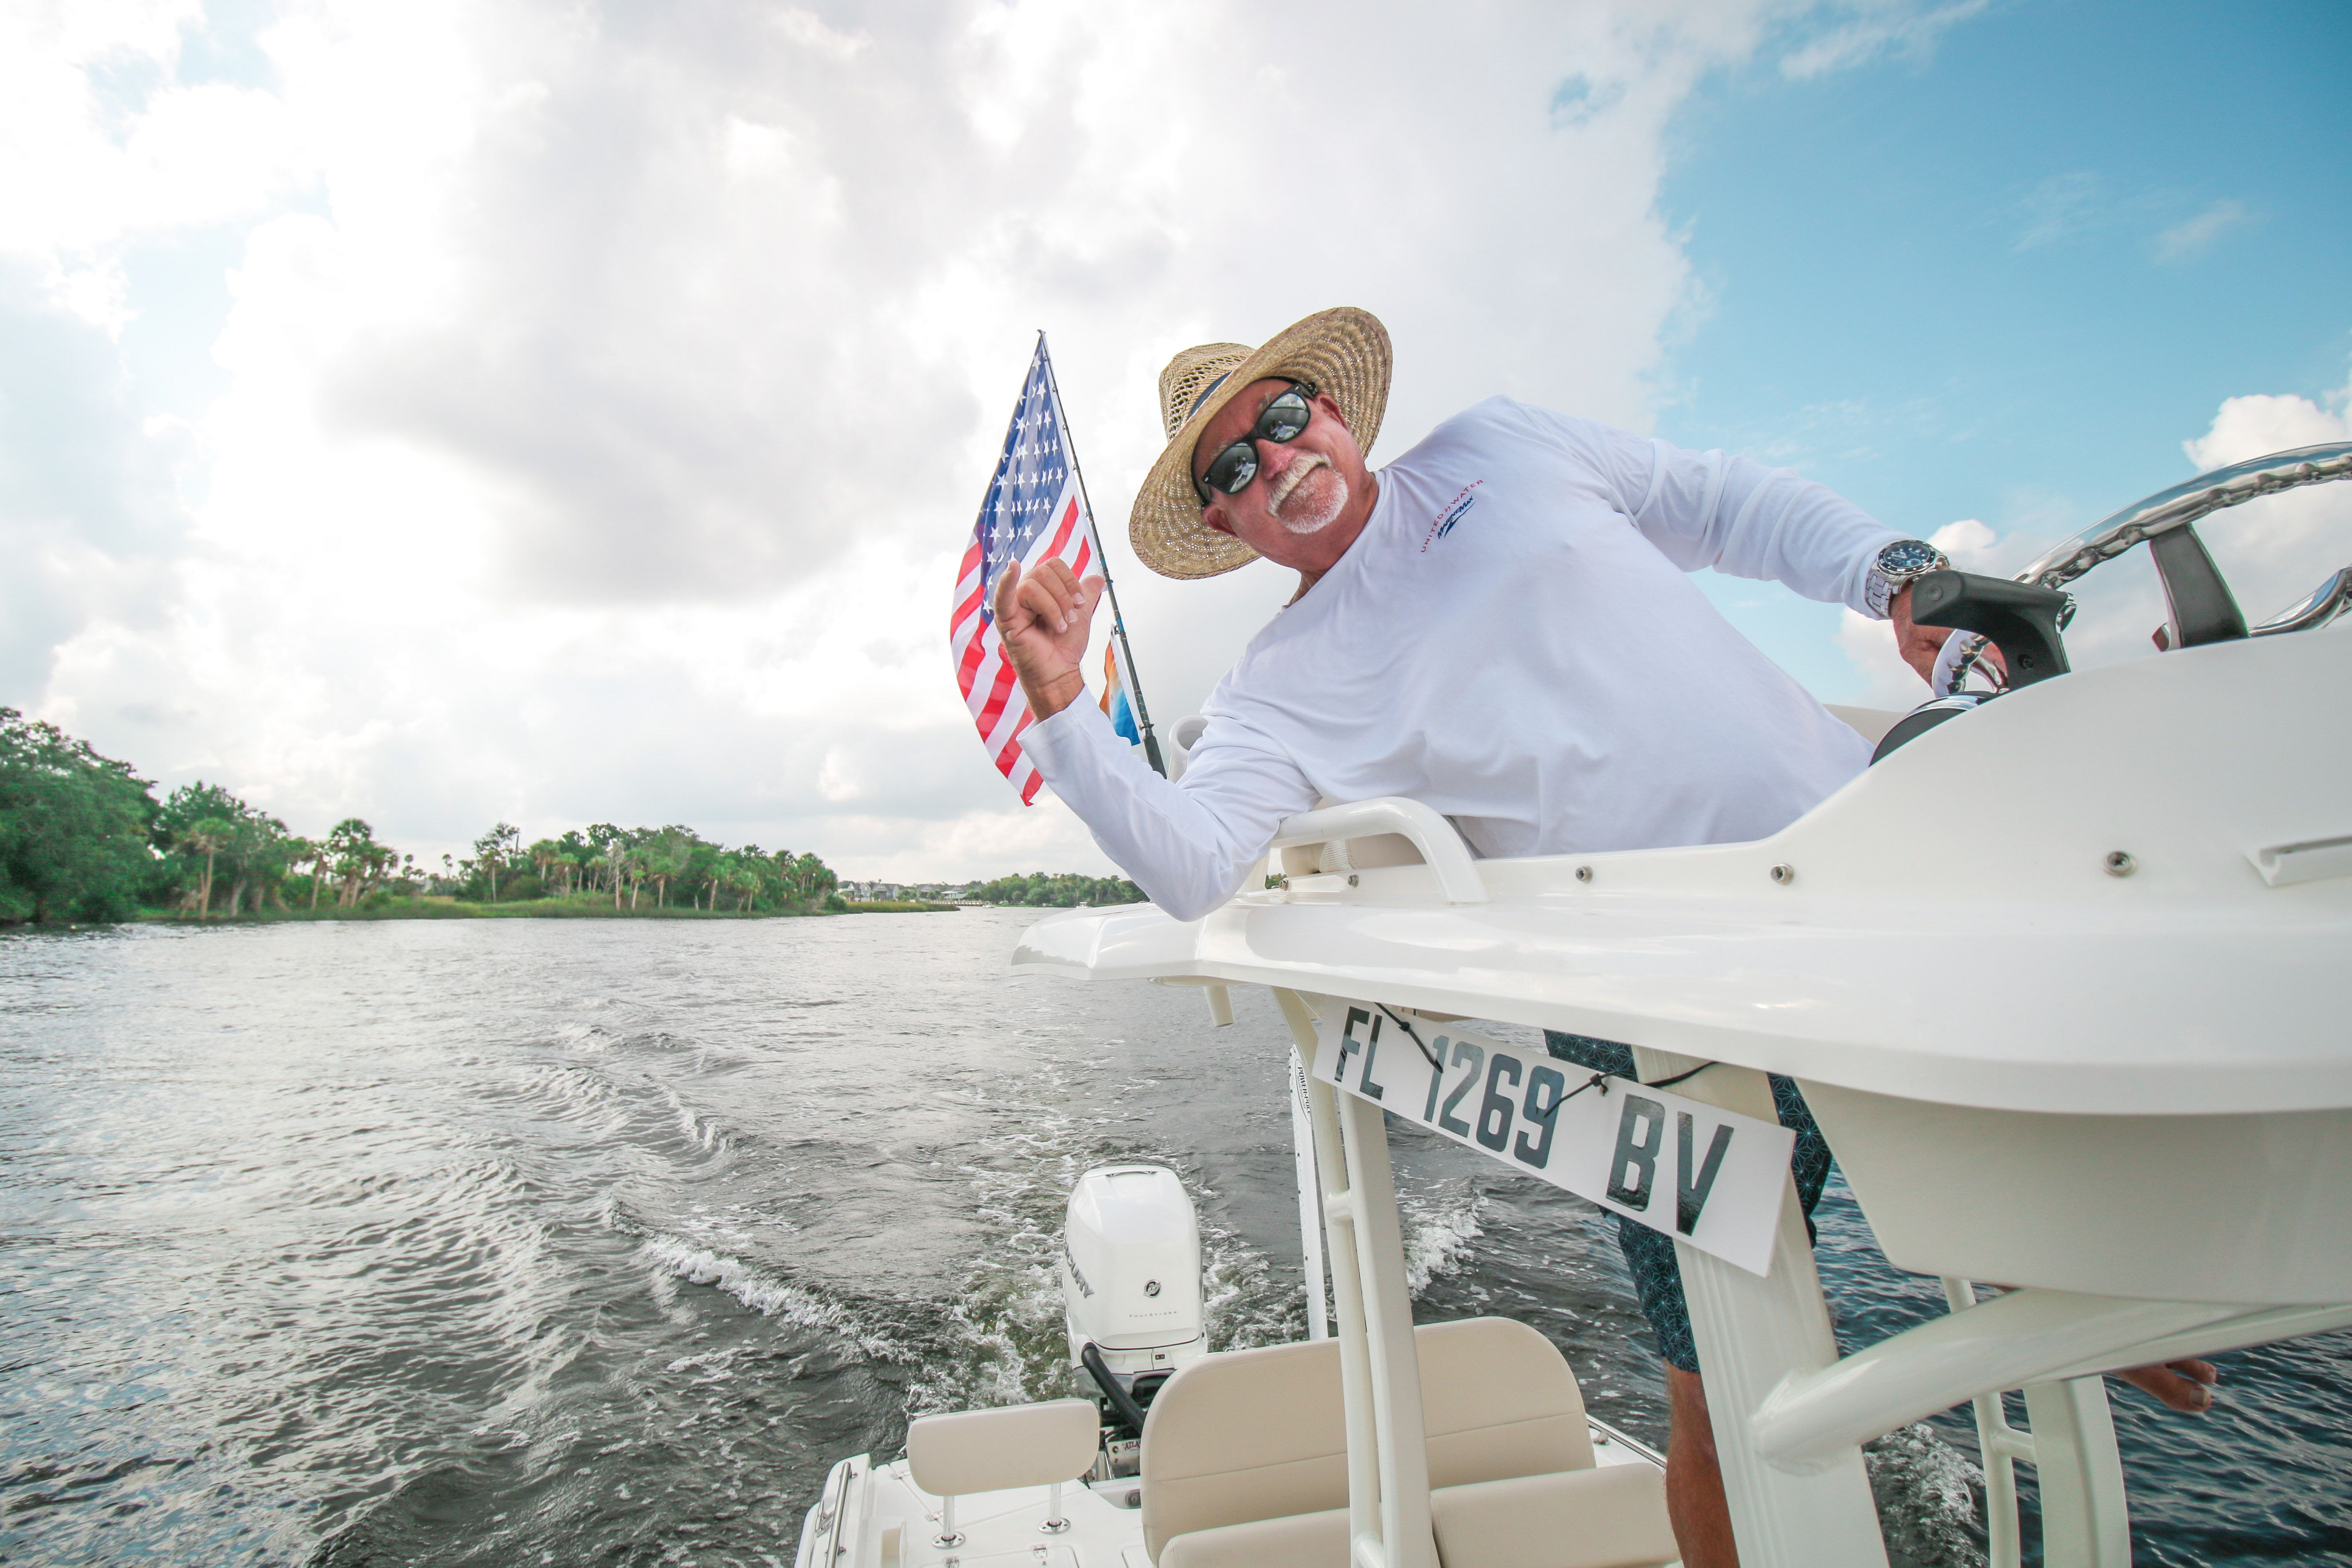 Captain Keith of MarineMax Clearwater